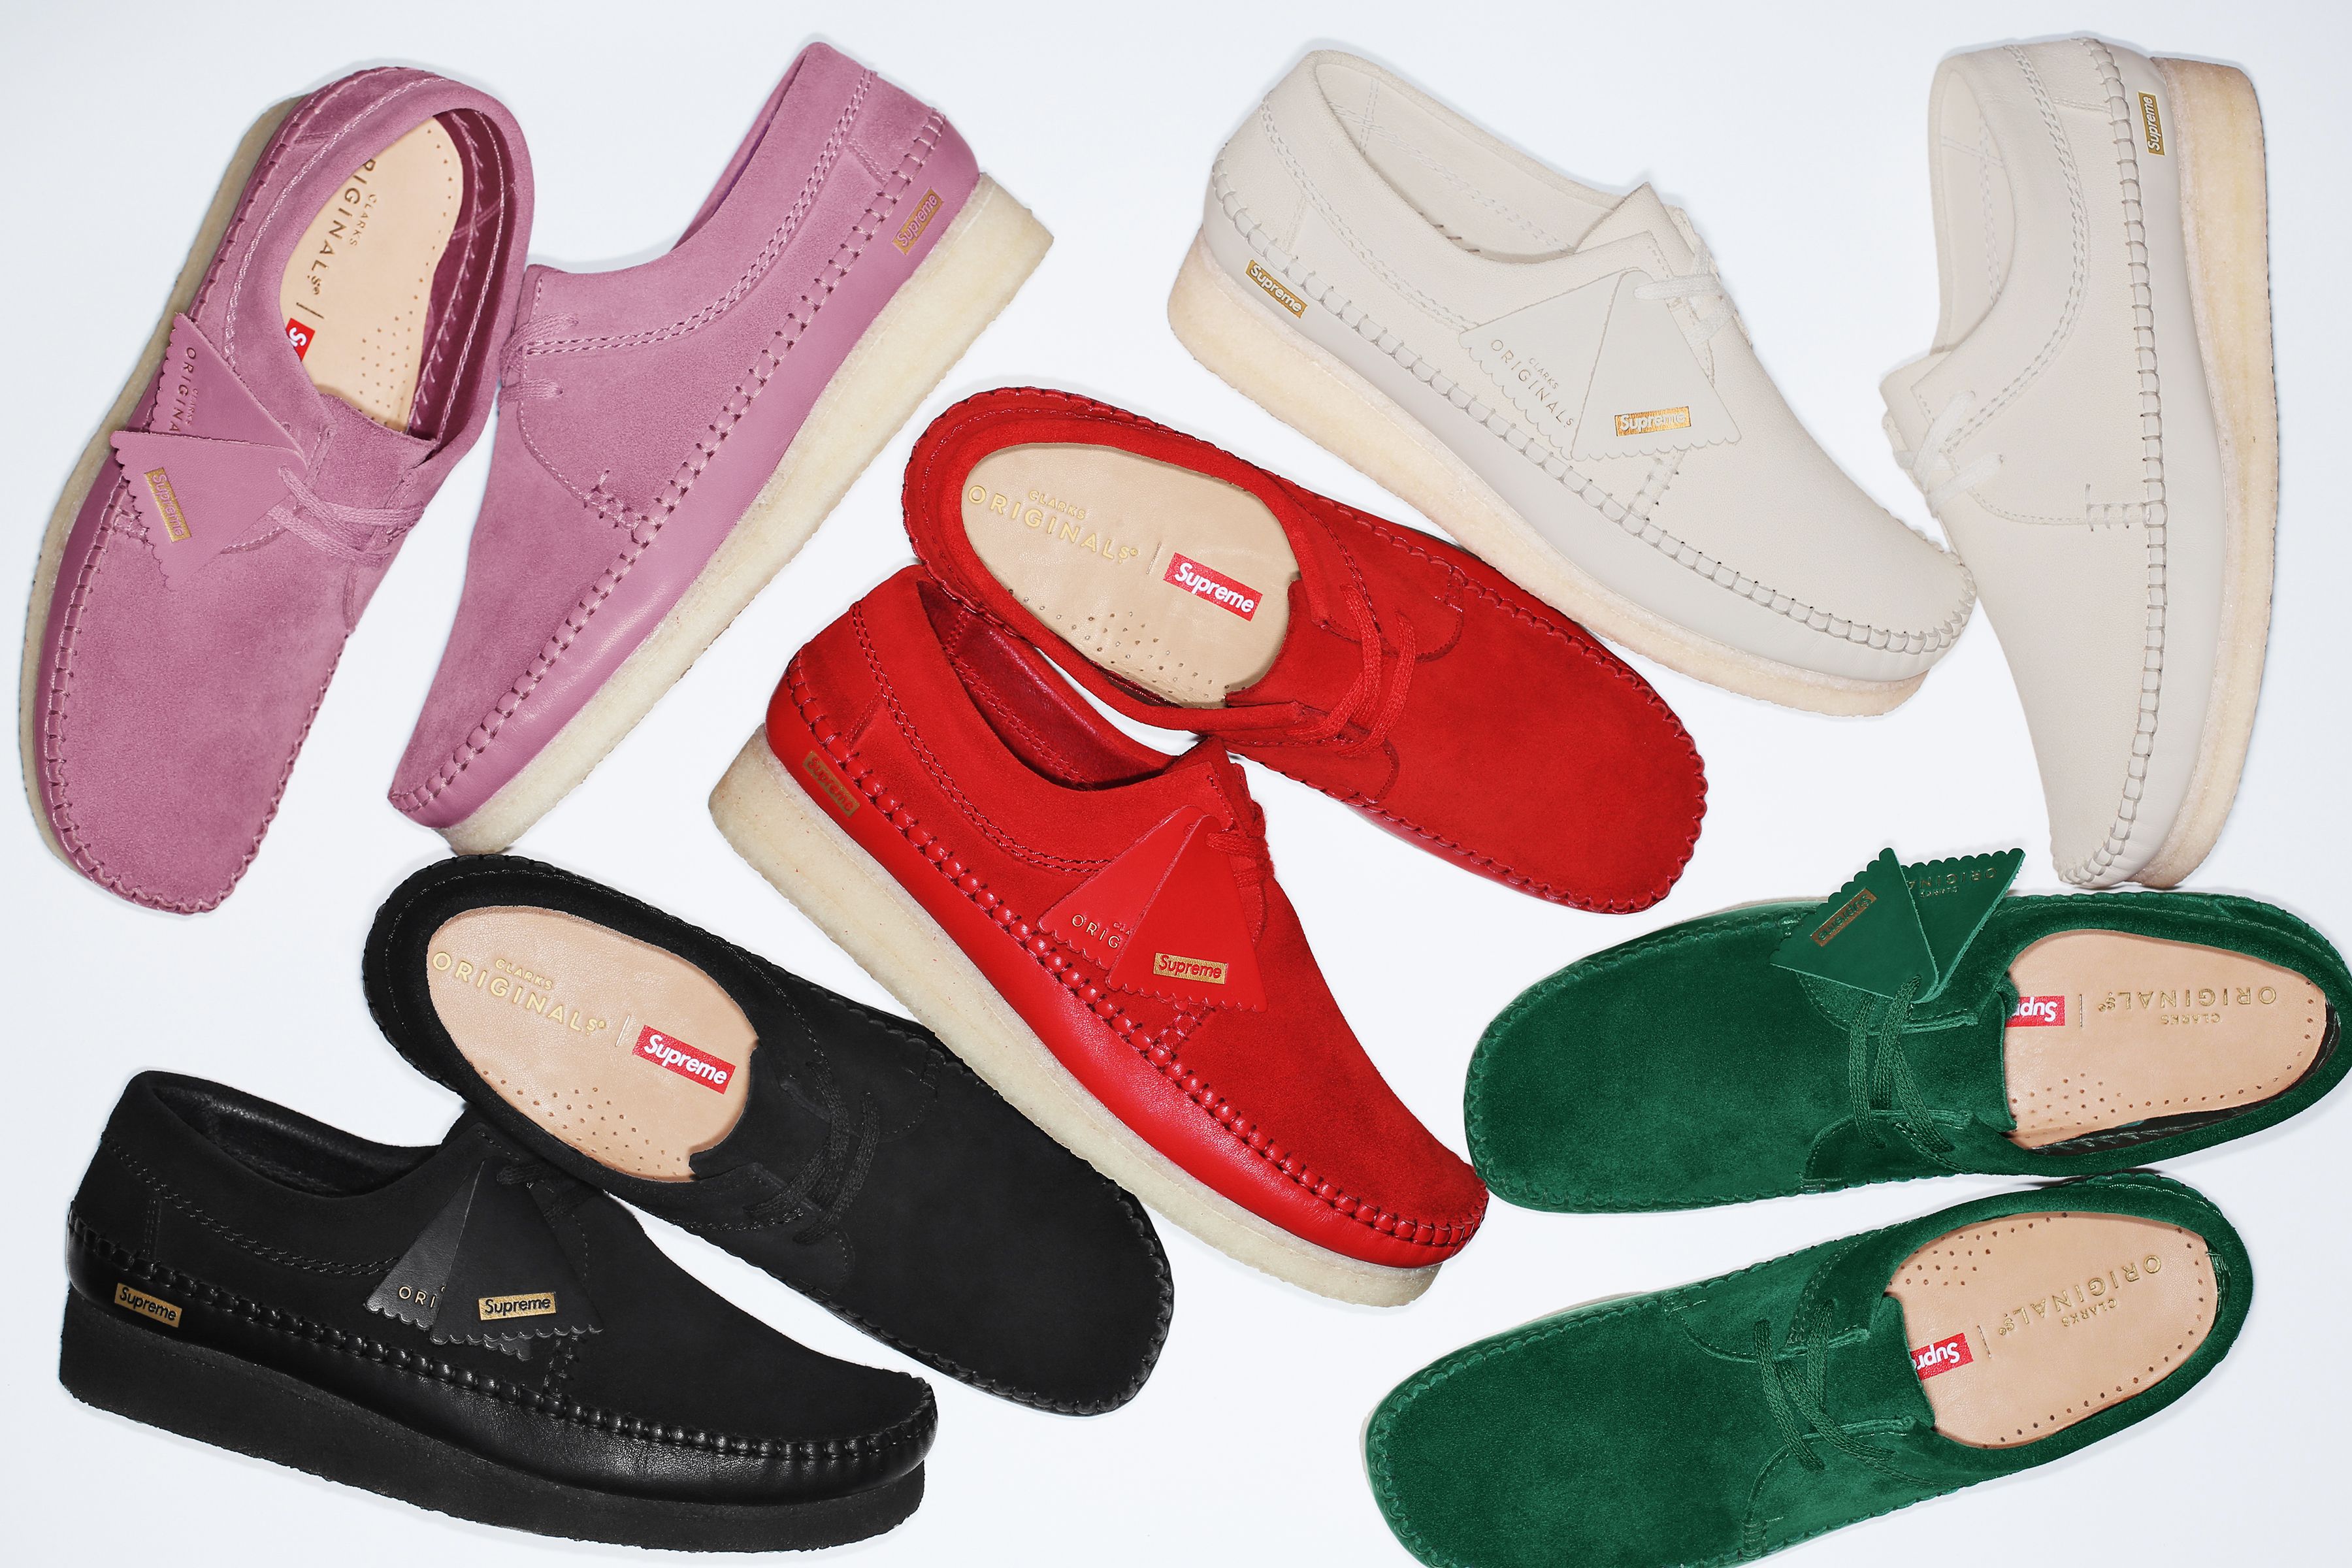 The Latest Supreme x Clarks Originals Collab Is a Summer Footwear 